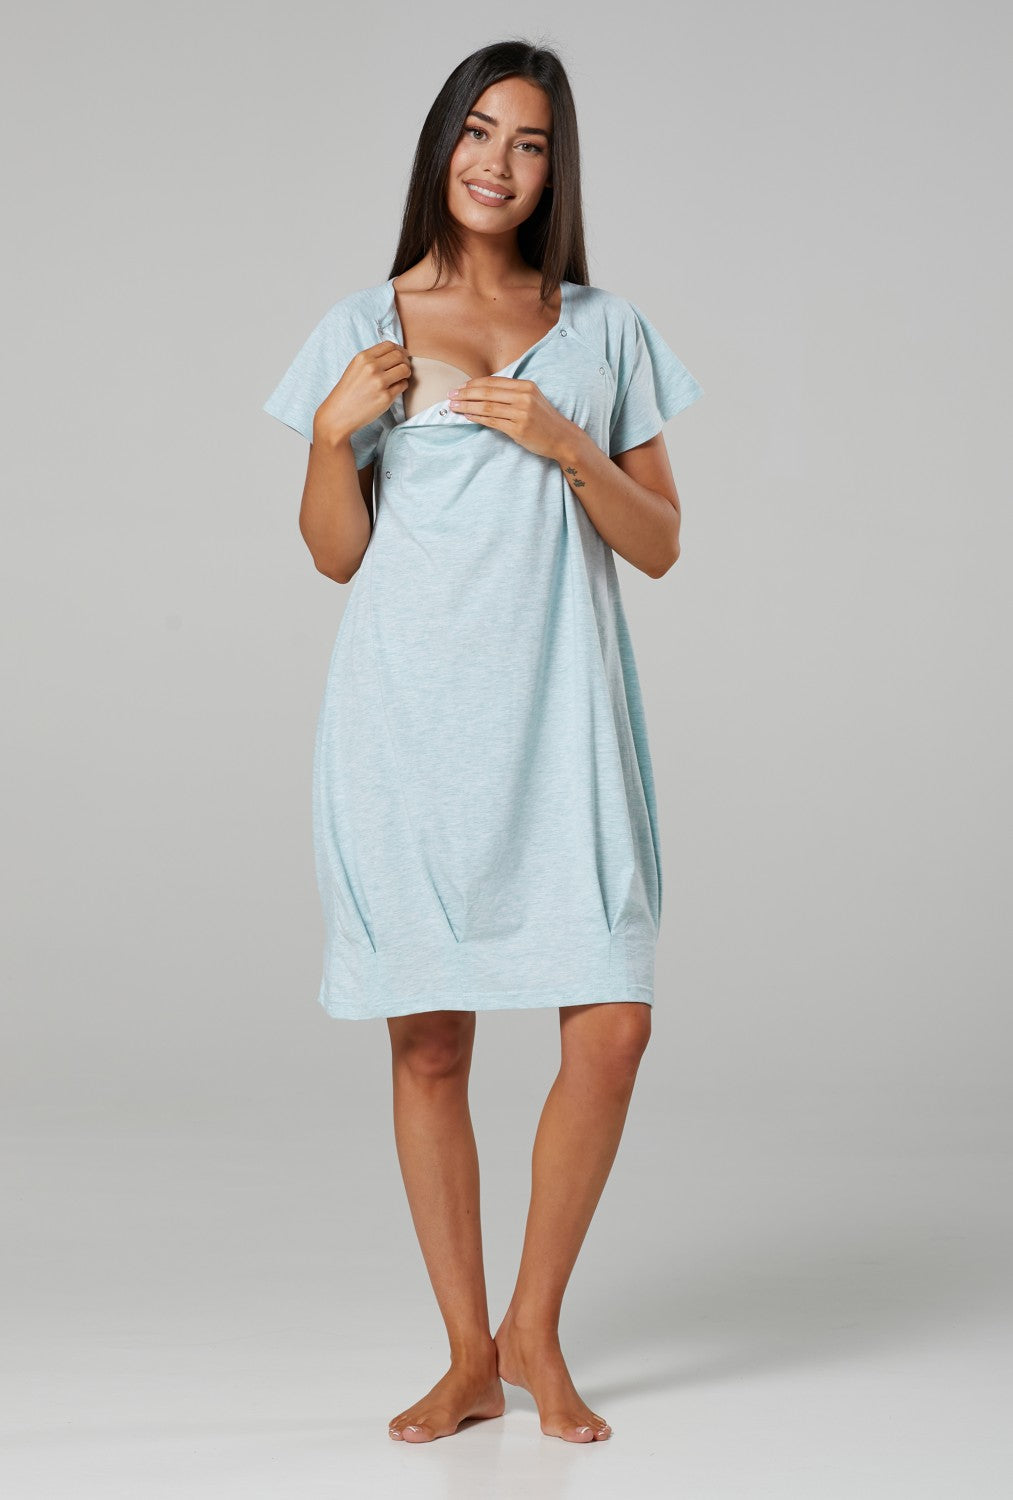 Light Blue Birthing Gowns Labor Gowns, Delivery Gowns, Hospital